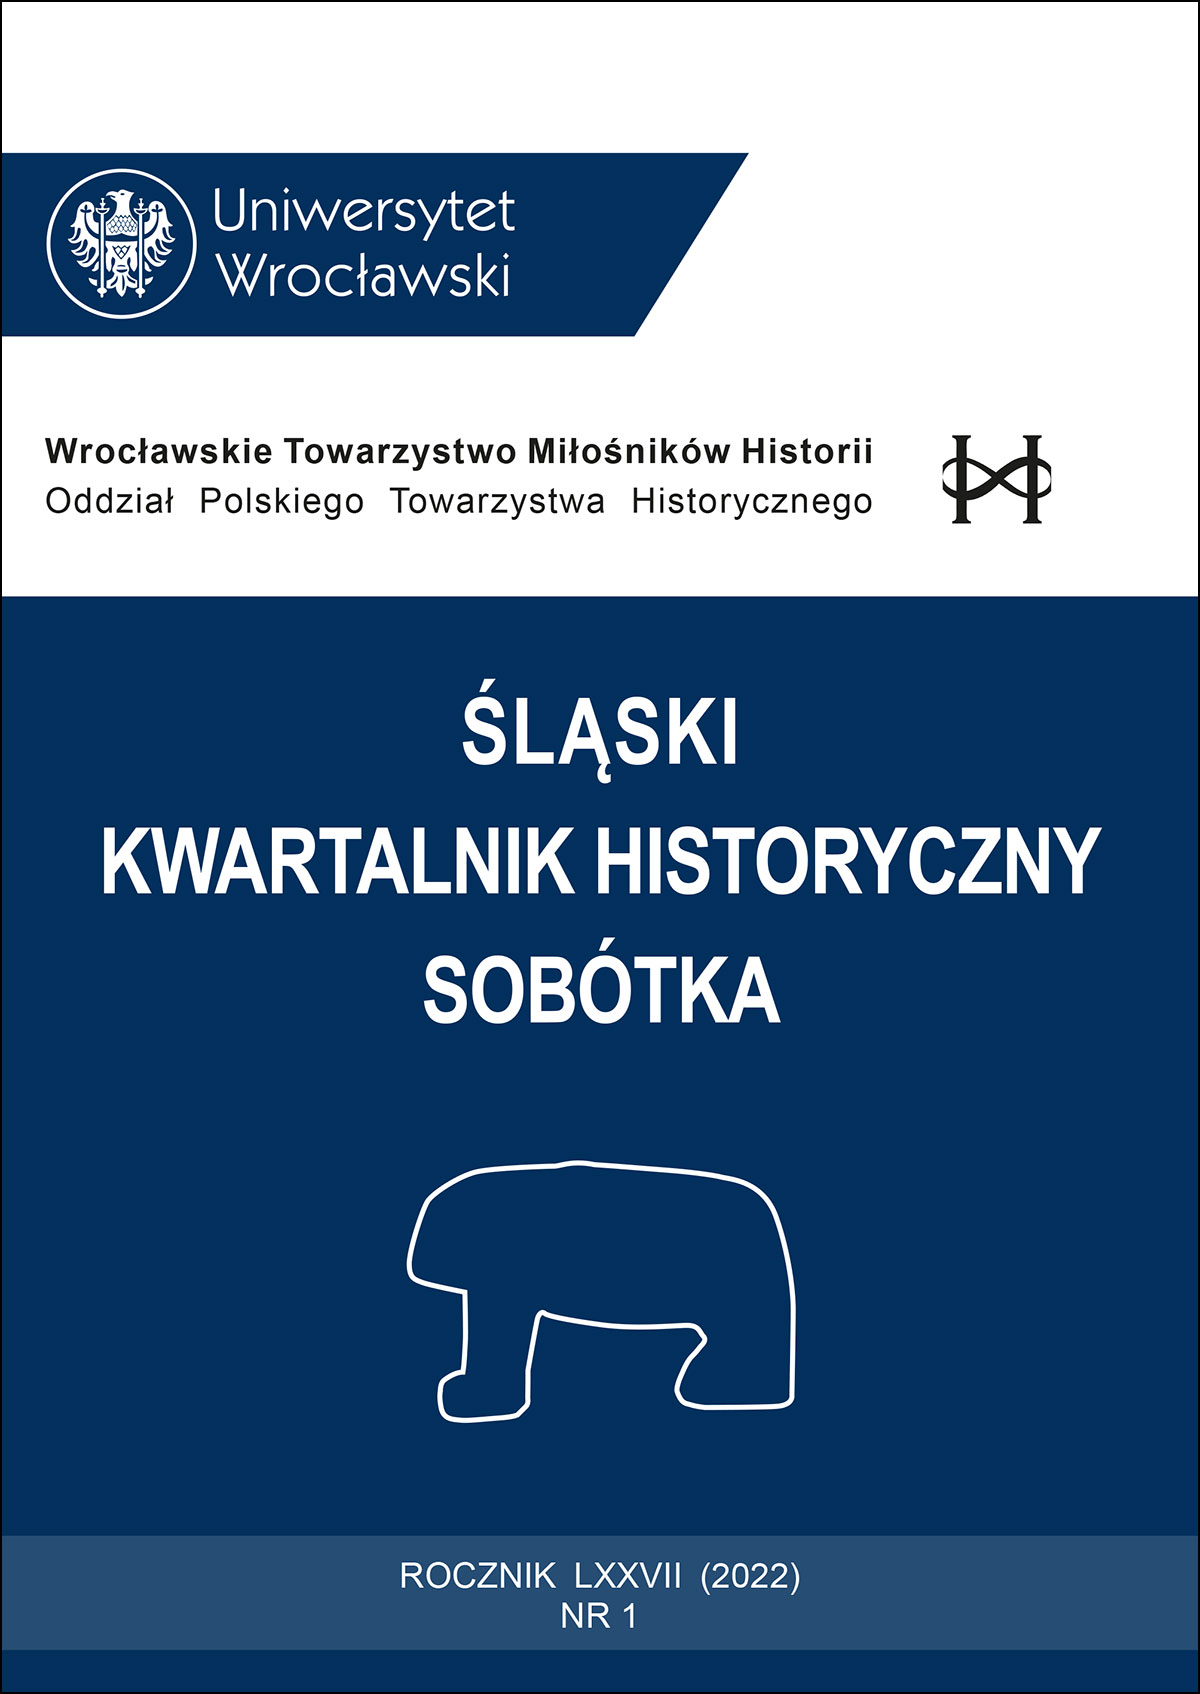 The latest pubications on the history of Silesia Cover Image